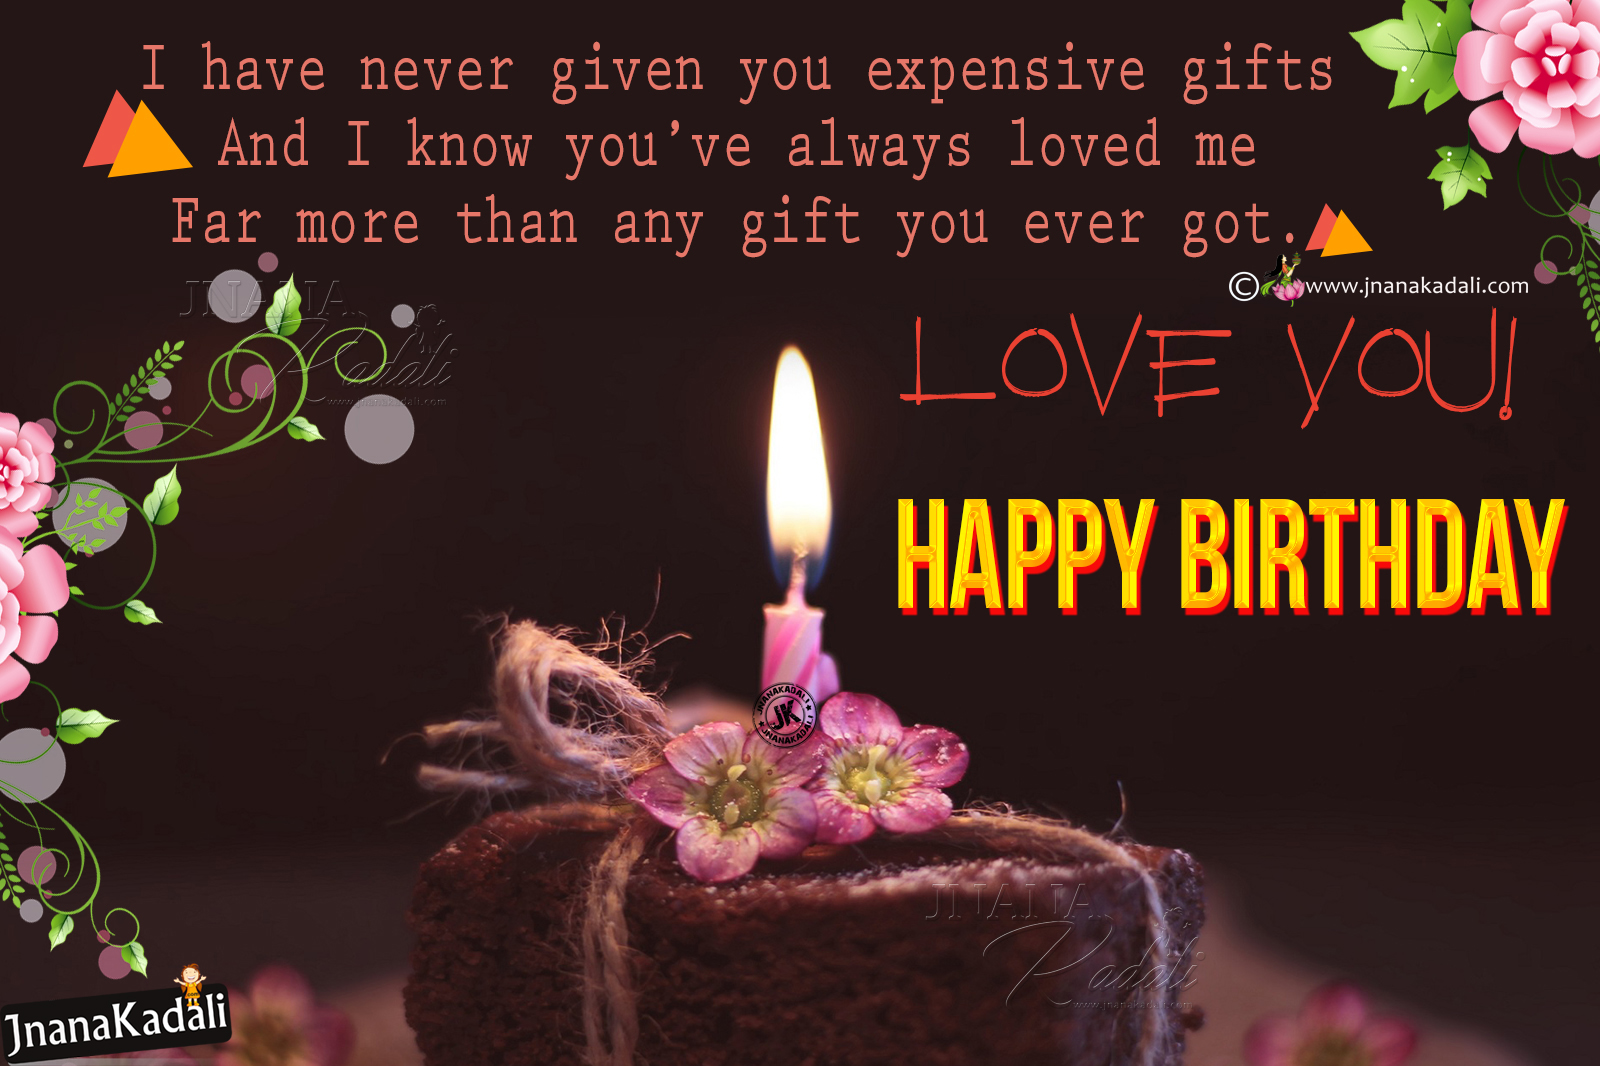 Best Happy Birthday Wishes Messages,Quotes And Greetings | JNANA ...